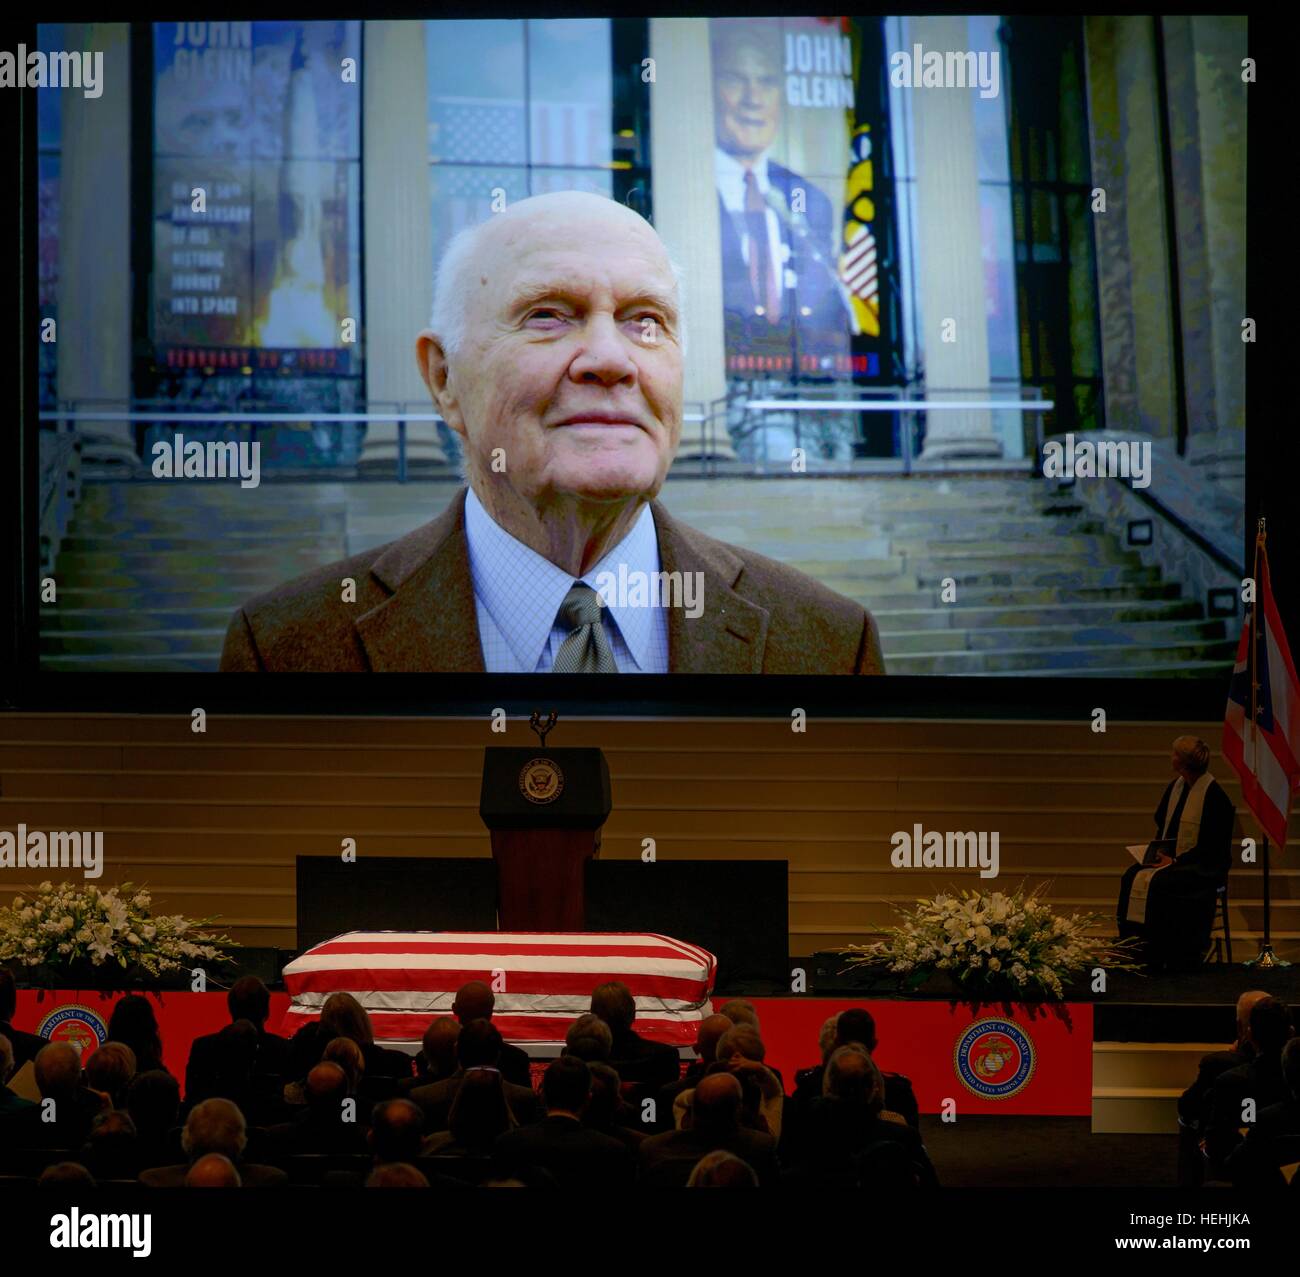 A lifetime of photos play on a large projector while friends and family gather to celebrate the life of former NASA astronaut and U.S. Senator John Glenn during a memorial service at the Ohio State University Mershon Auditorium December 17, 2016 in Columbus, Ohio. Stock Photo